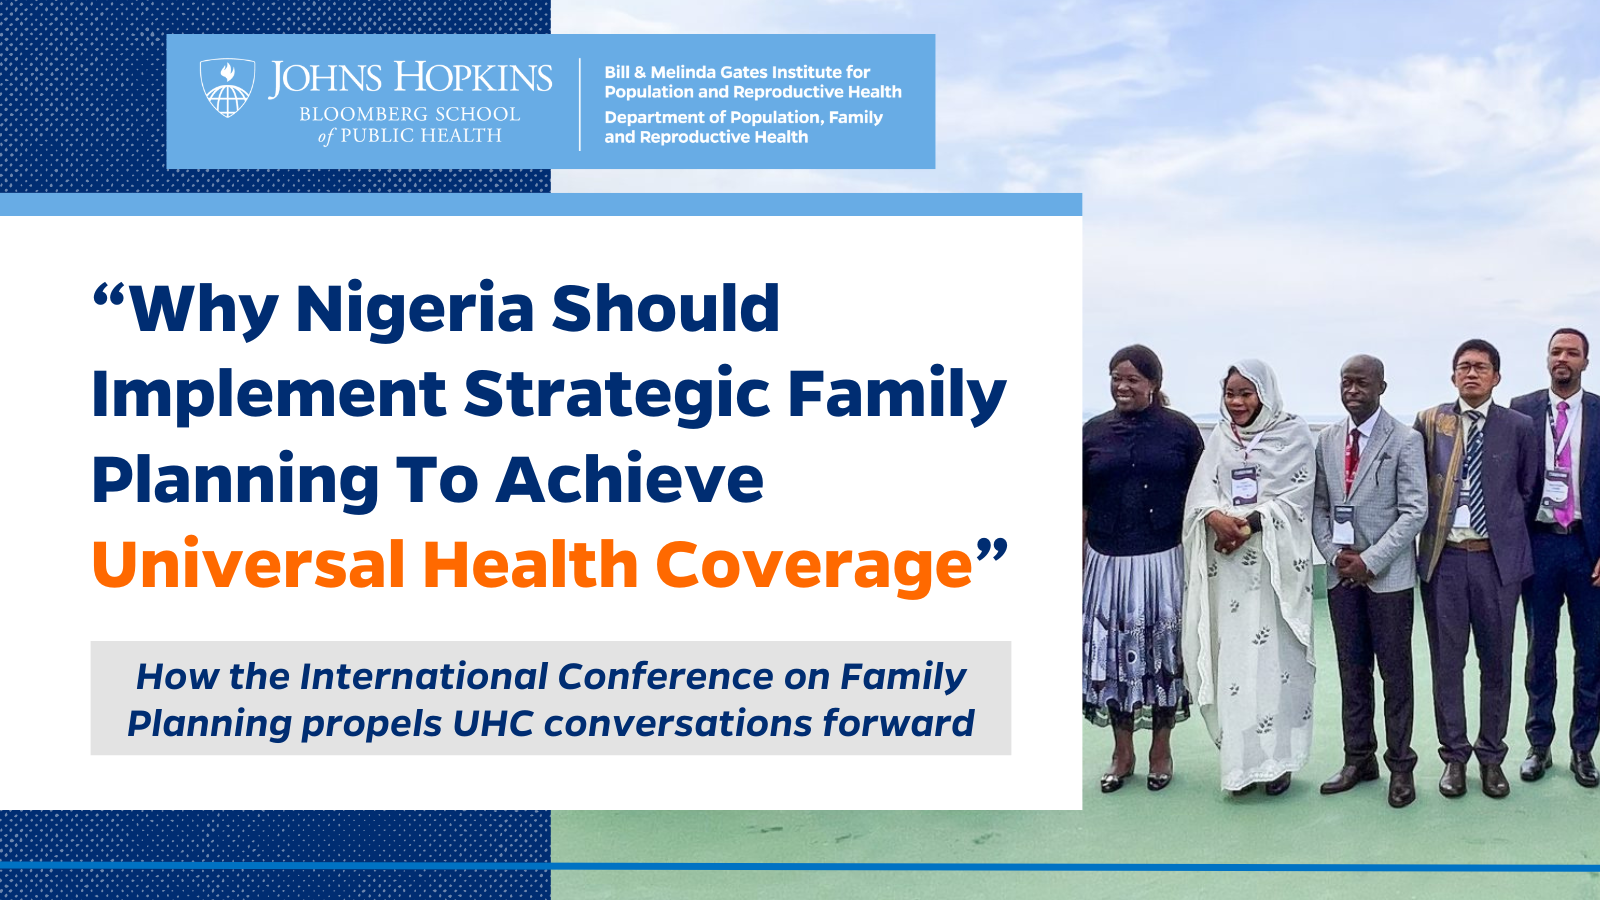 Using Family Planning To Achieve Universal Health Coverage